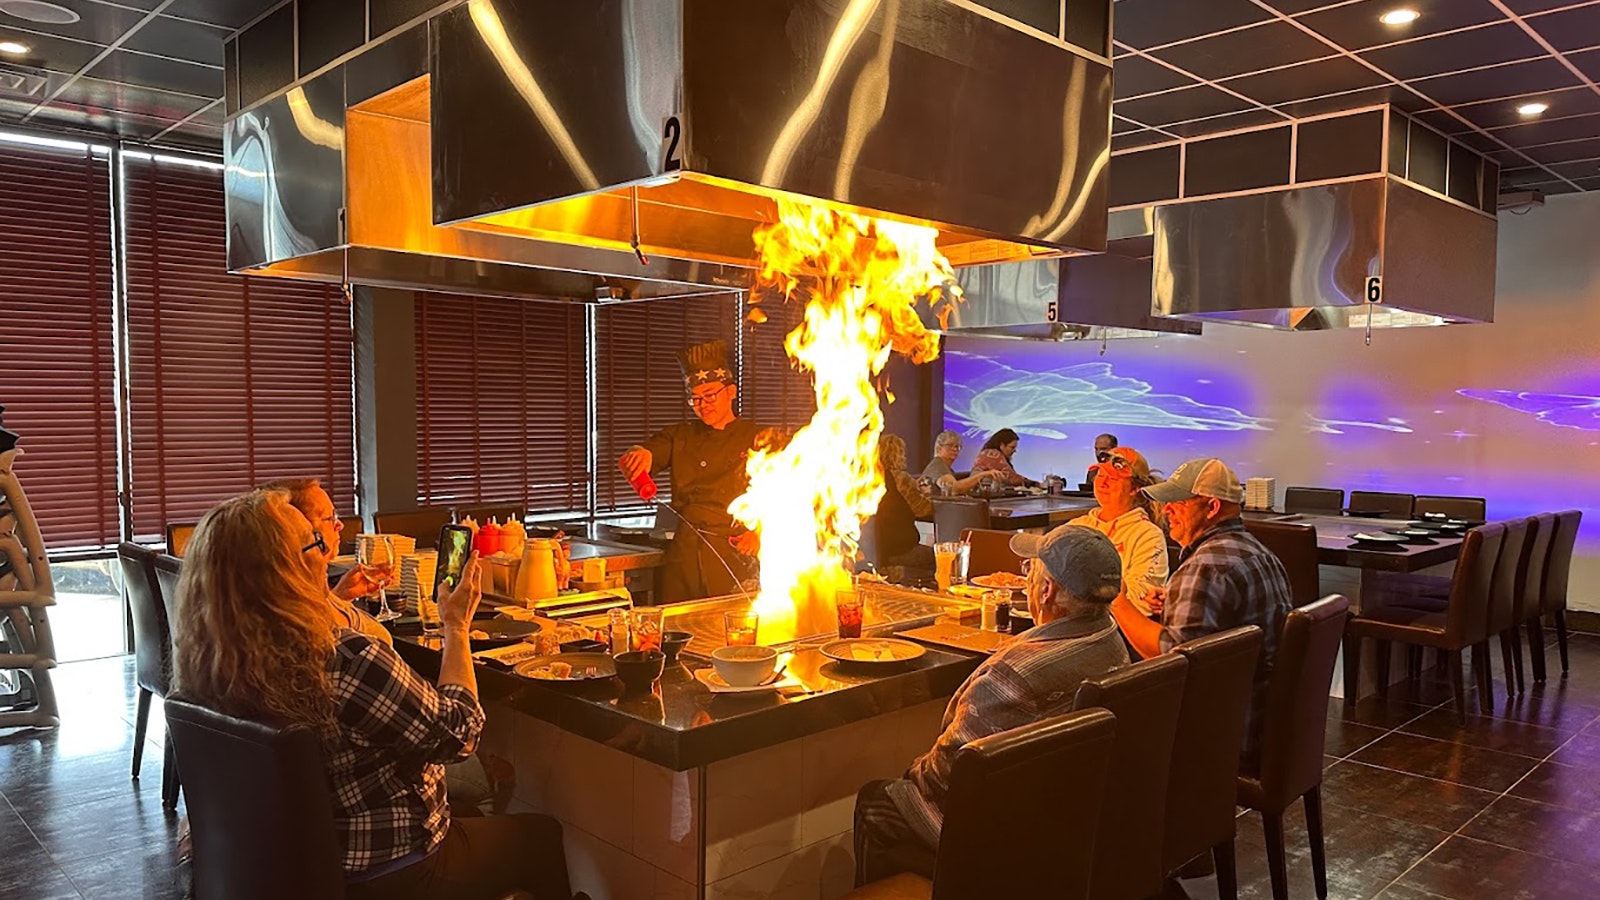 An experience at one of Jerry Zhang's restaurants, like the Ichiban in Riverton, is entertaining as well as delicious.